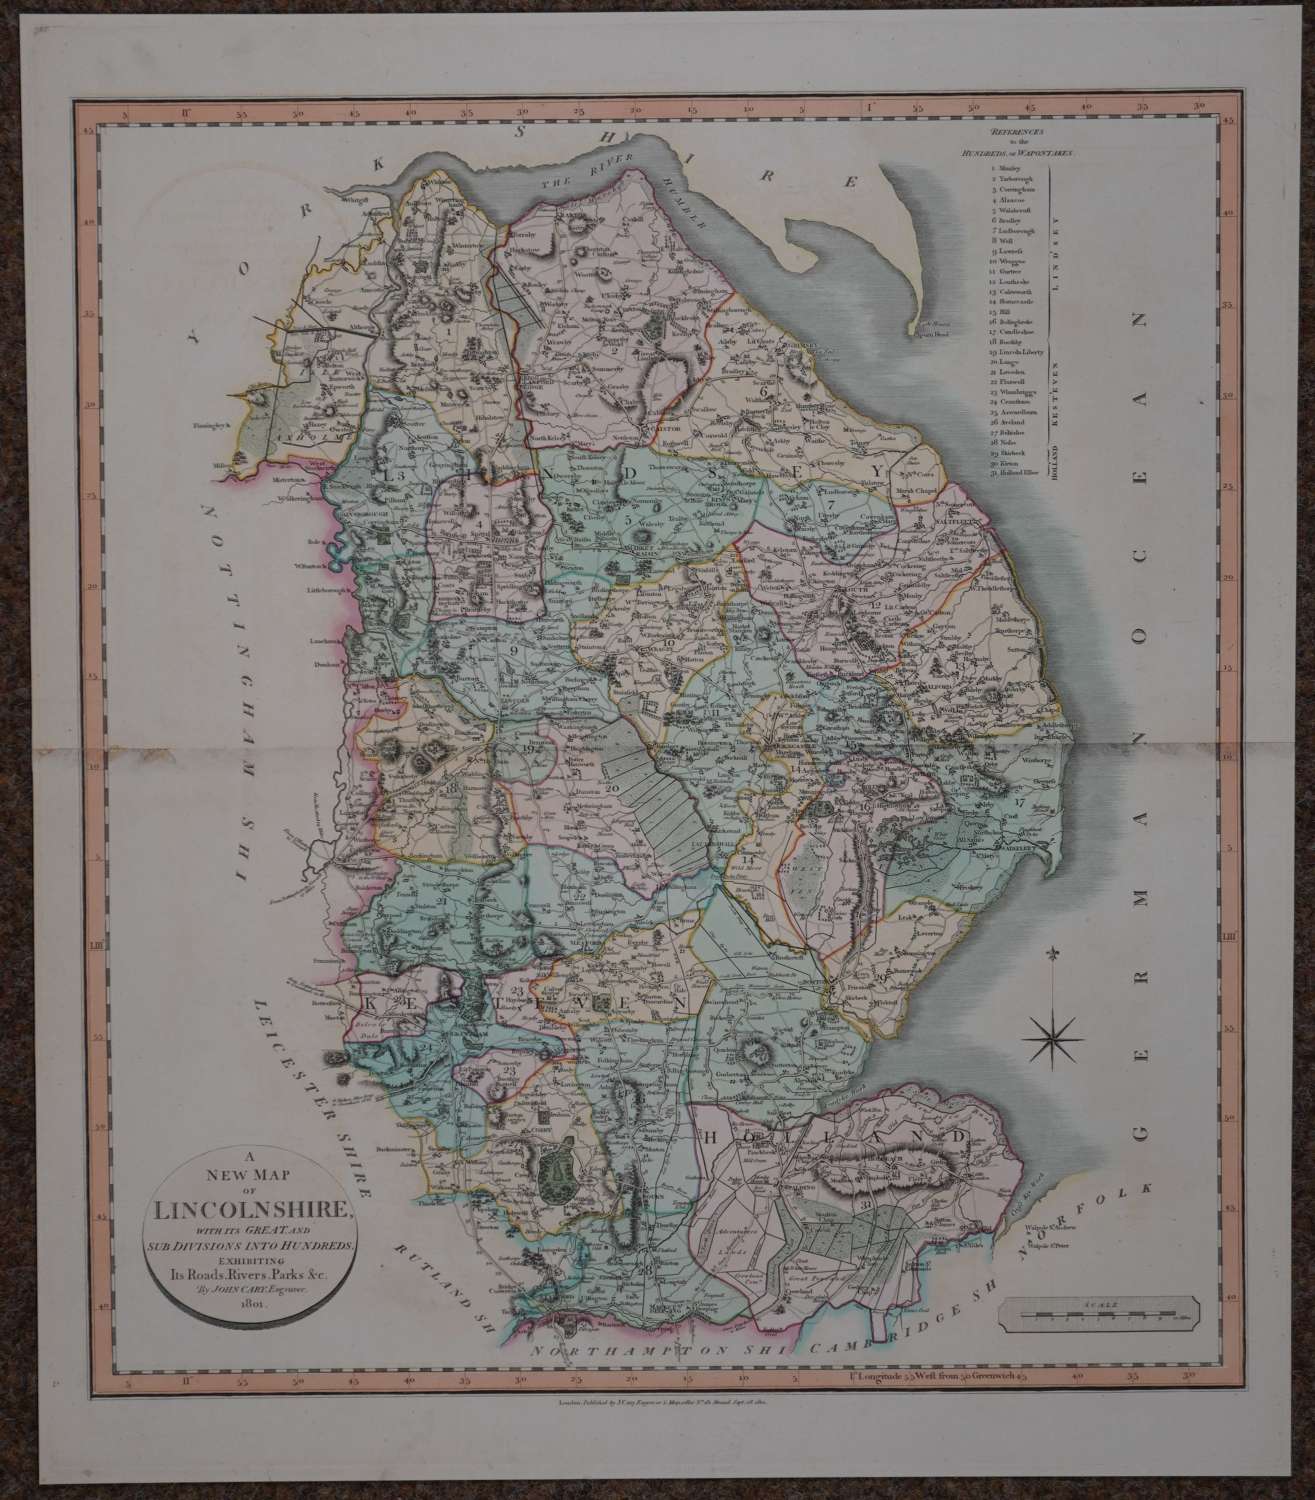 A New Map of Lincolnshire by John Cary